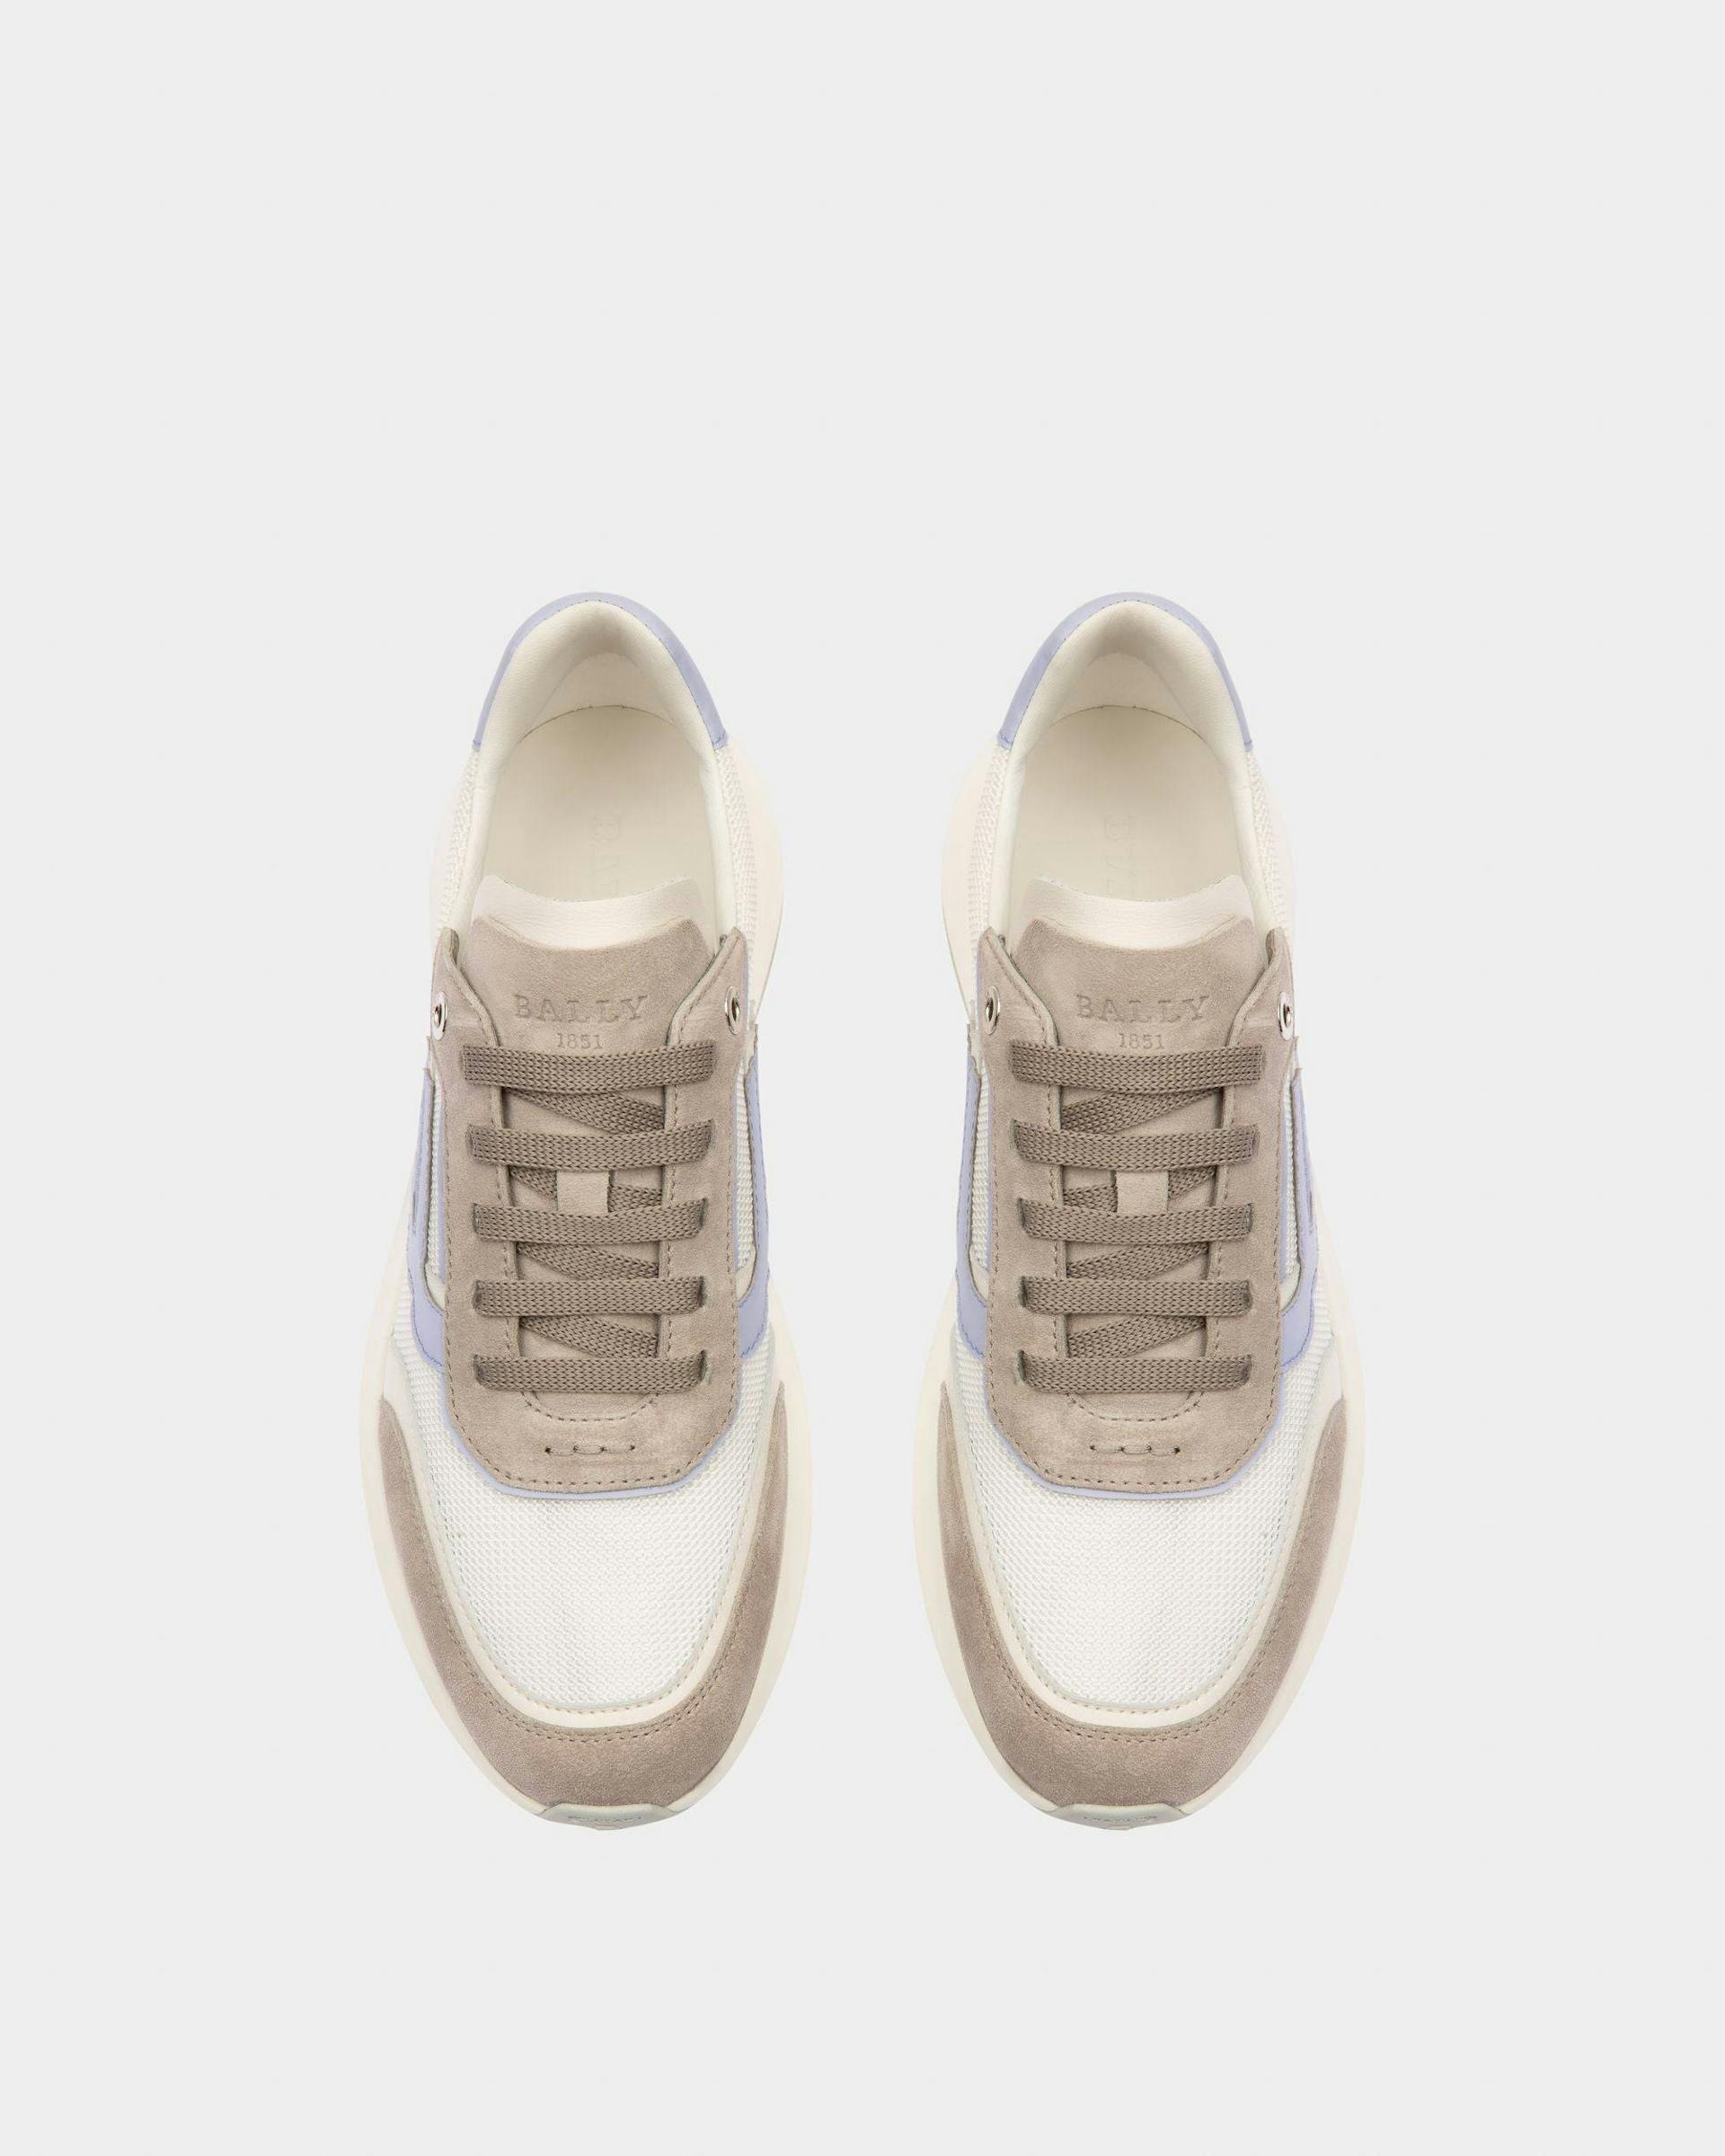 Demmy Mesh And Leather Sneakers In White And Grey - Women's - Bally - 02